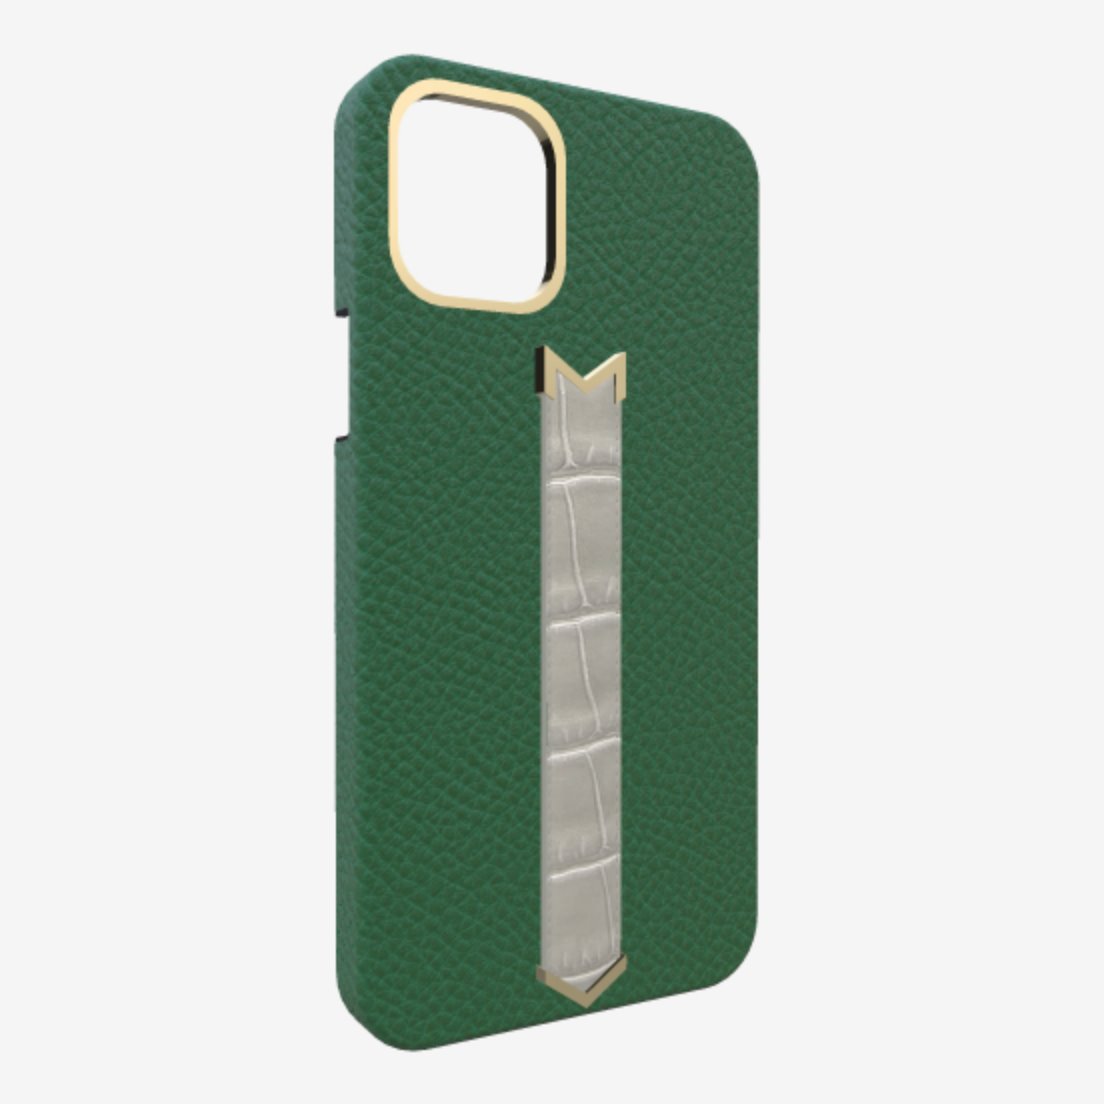 Gold Finger Strap Case for iPhone 13 Pro Max in Genuine Calfskin and Alligator Emerald Green Pearl Grey 